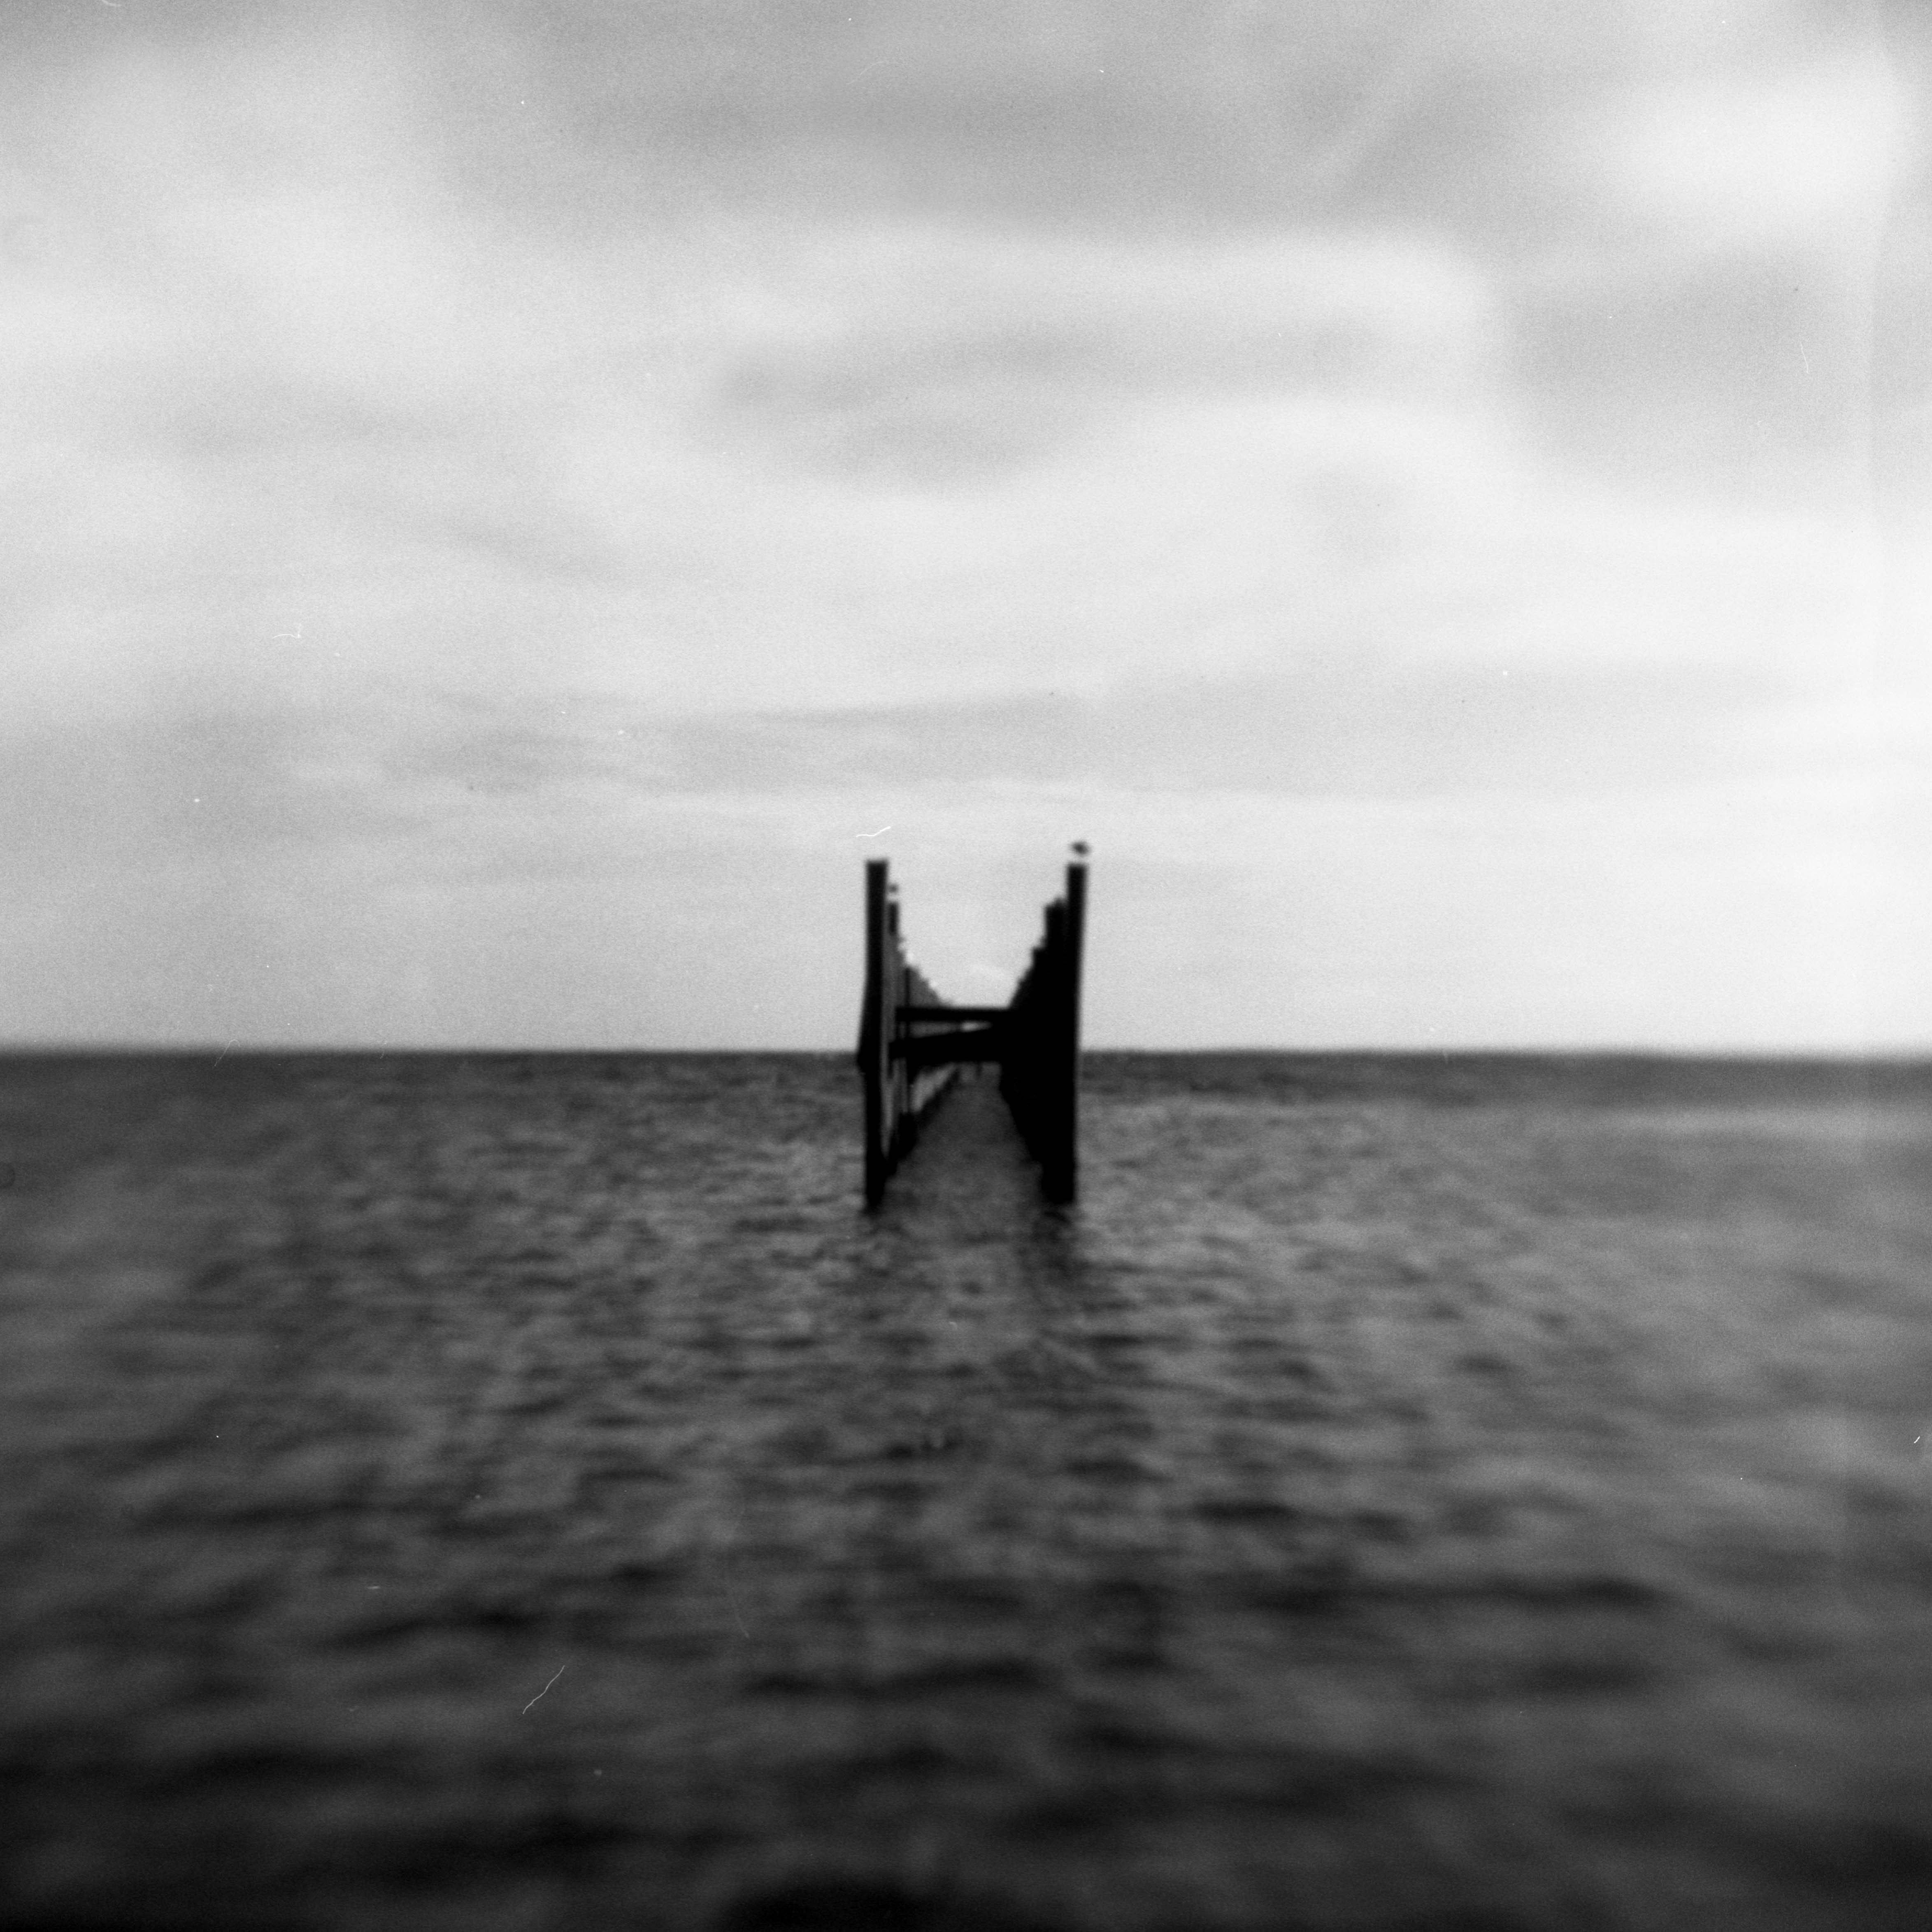 a photograph of pier supports in the sea